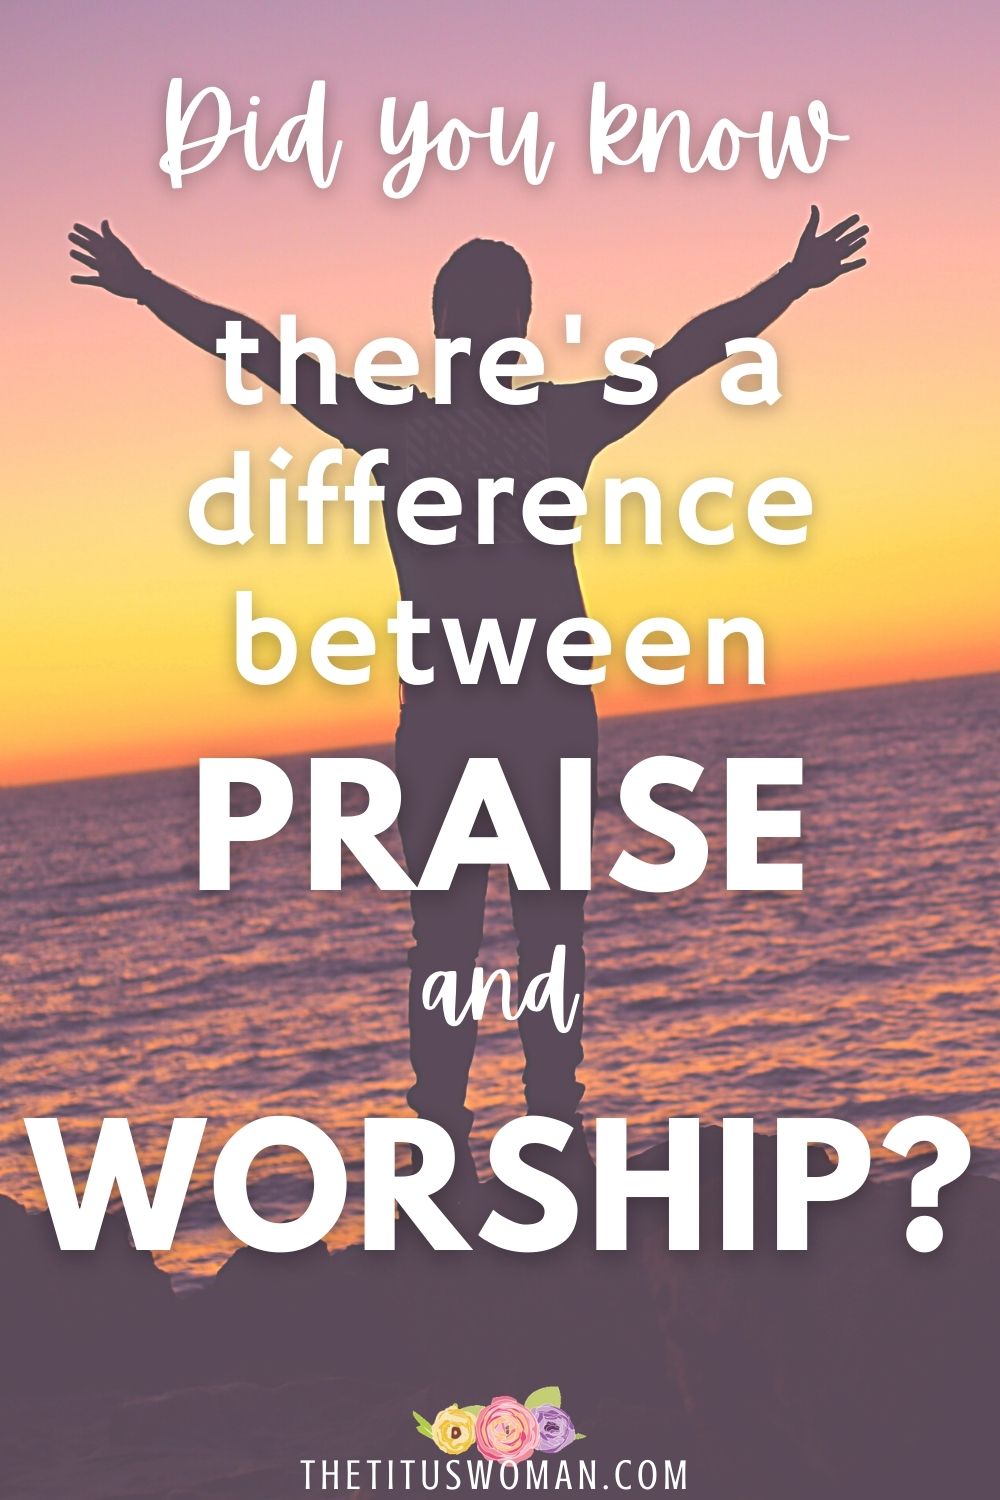 did you know there's a difference between praise and worship?